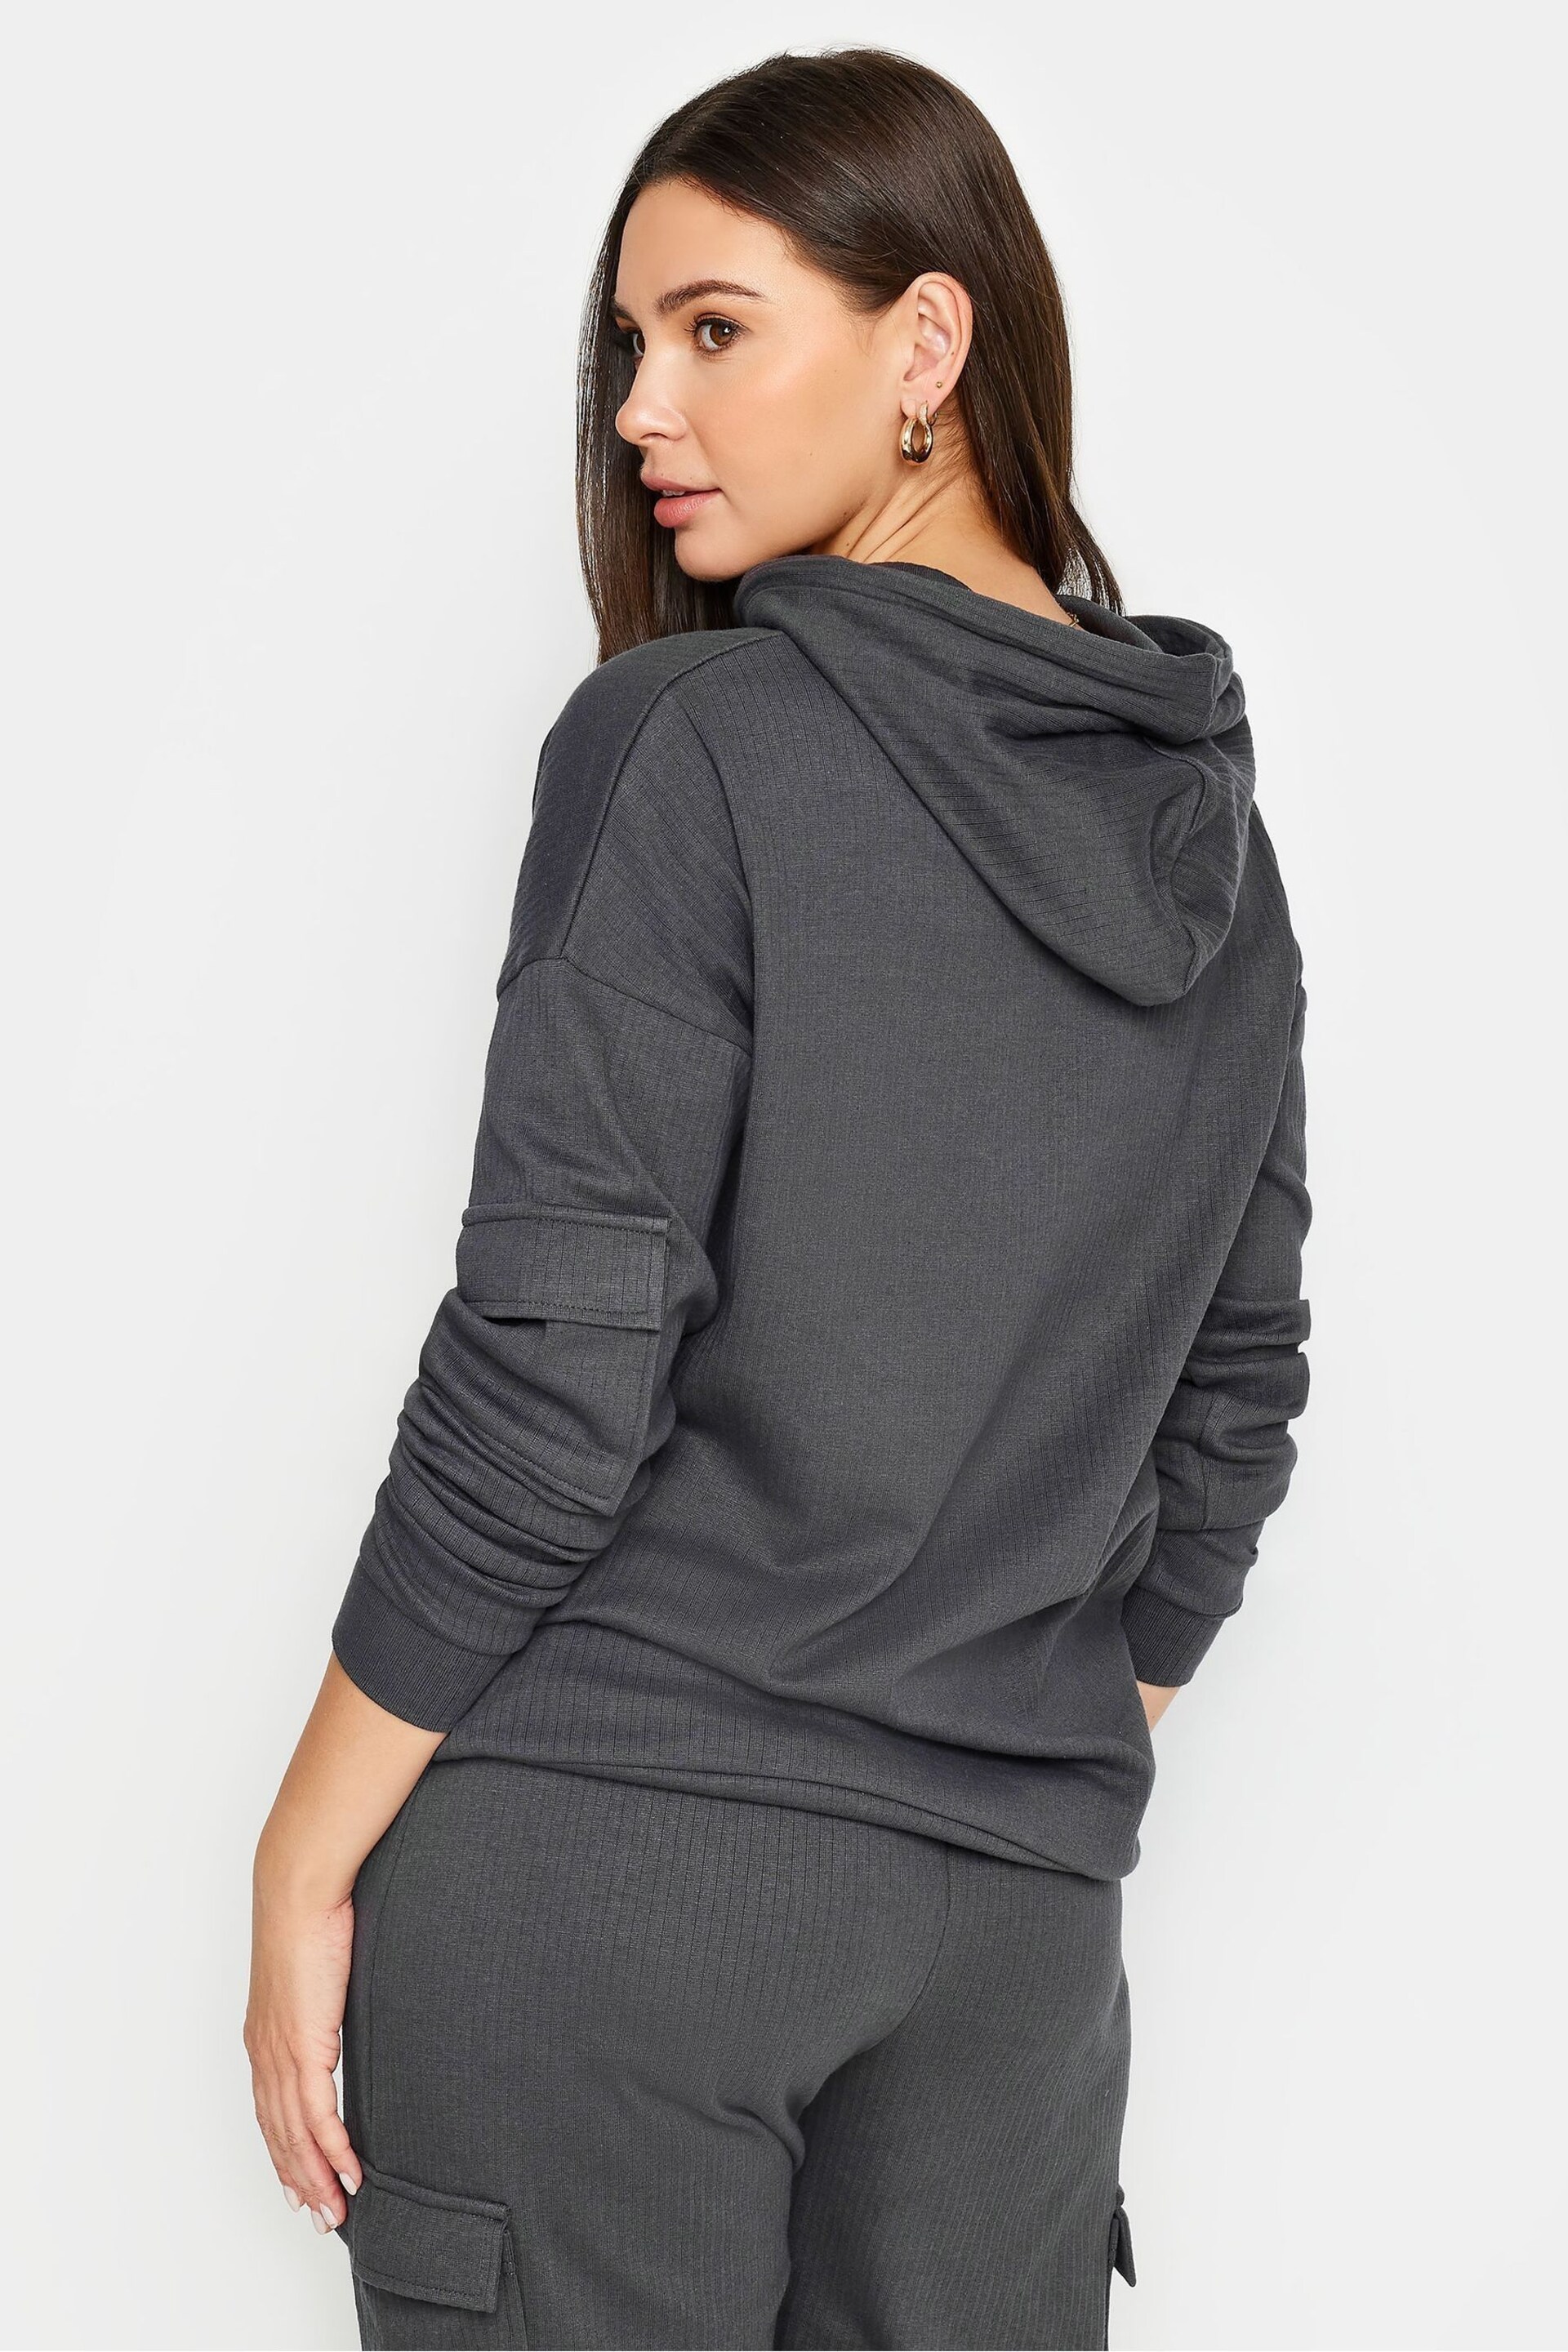 Long Tall Sally Grey Tall Ribbed Cargo Hoodie - Image 3 of 4